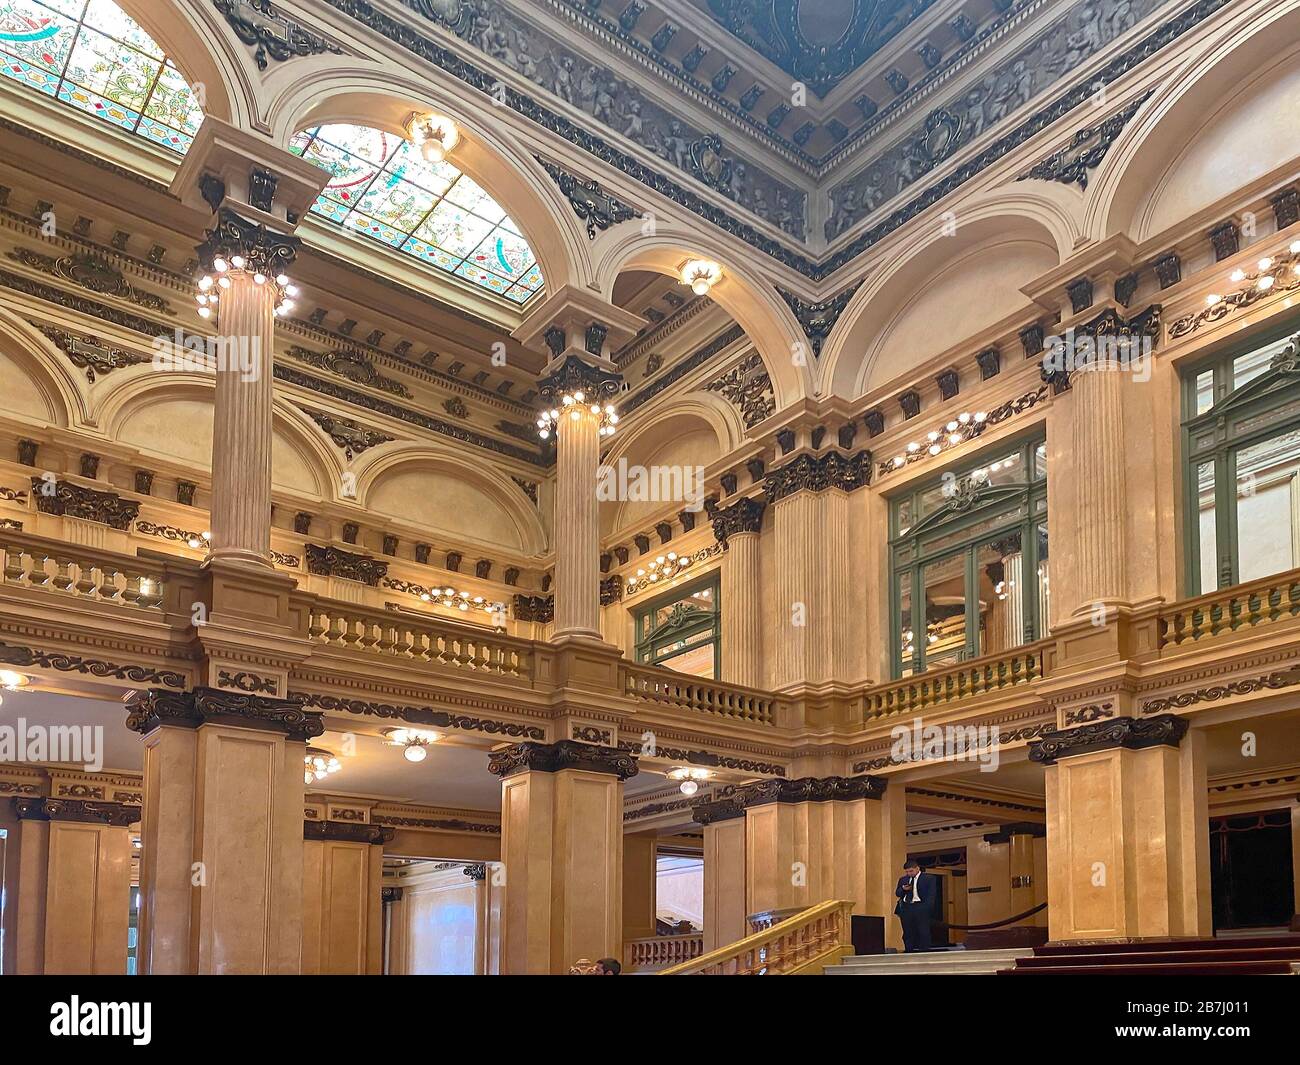 El Teatro Colon; Opera house; 1908; elegant interior; foyer; stained glass windows, arches, South America; Buenos Aires; Argentina; summer Stock Photo